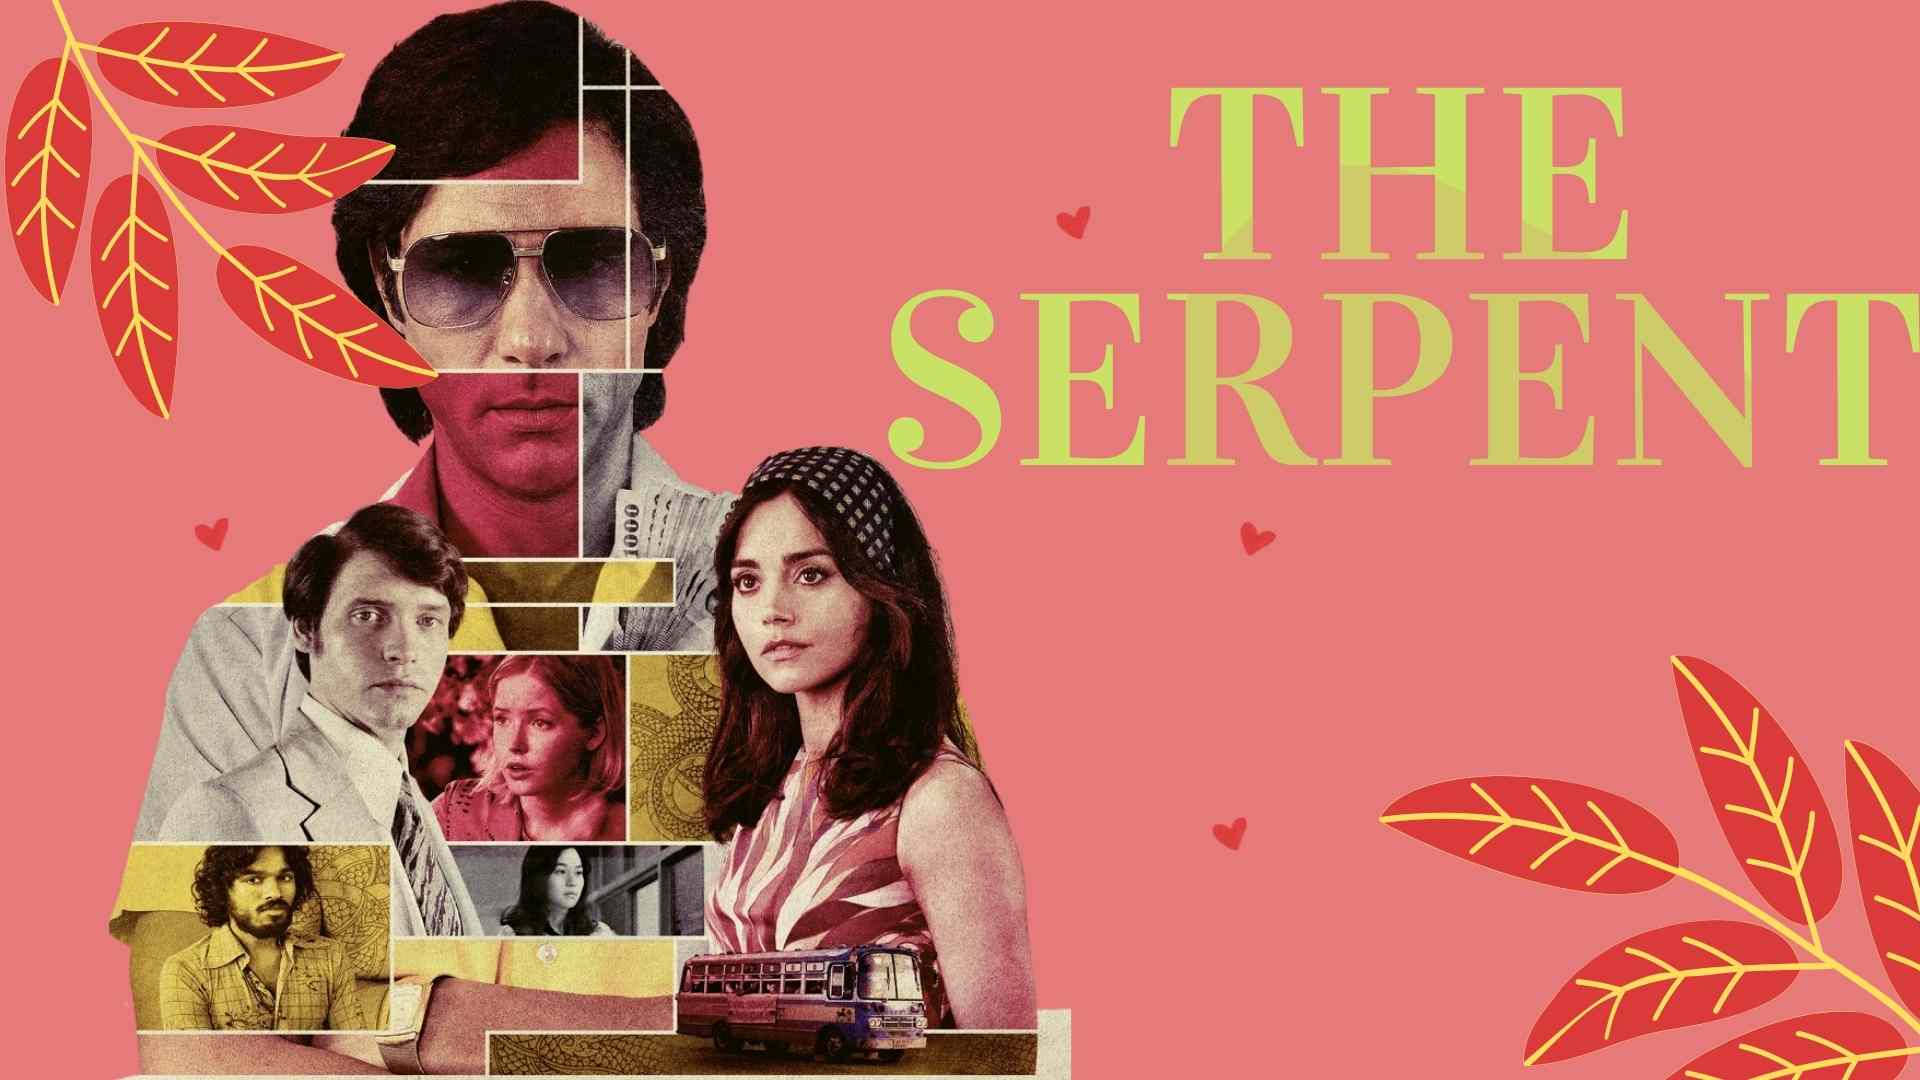 The Serpent Wallpapers and images poster